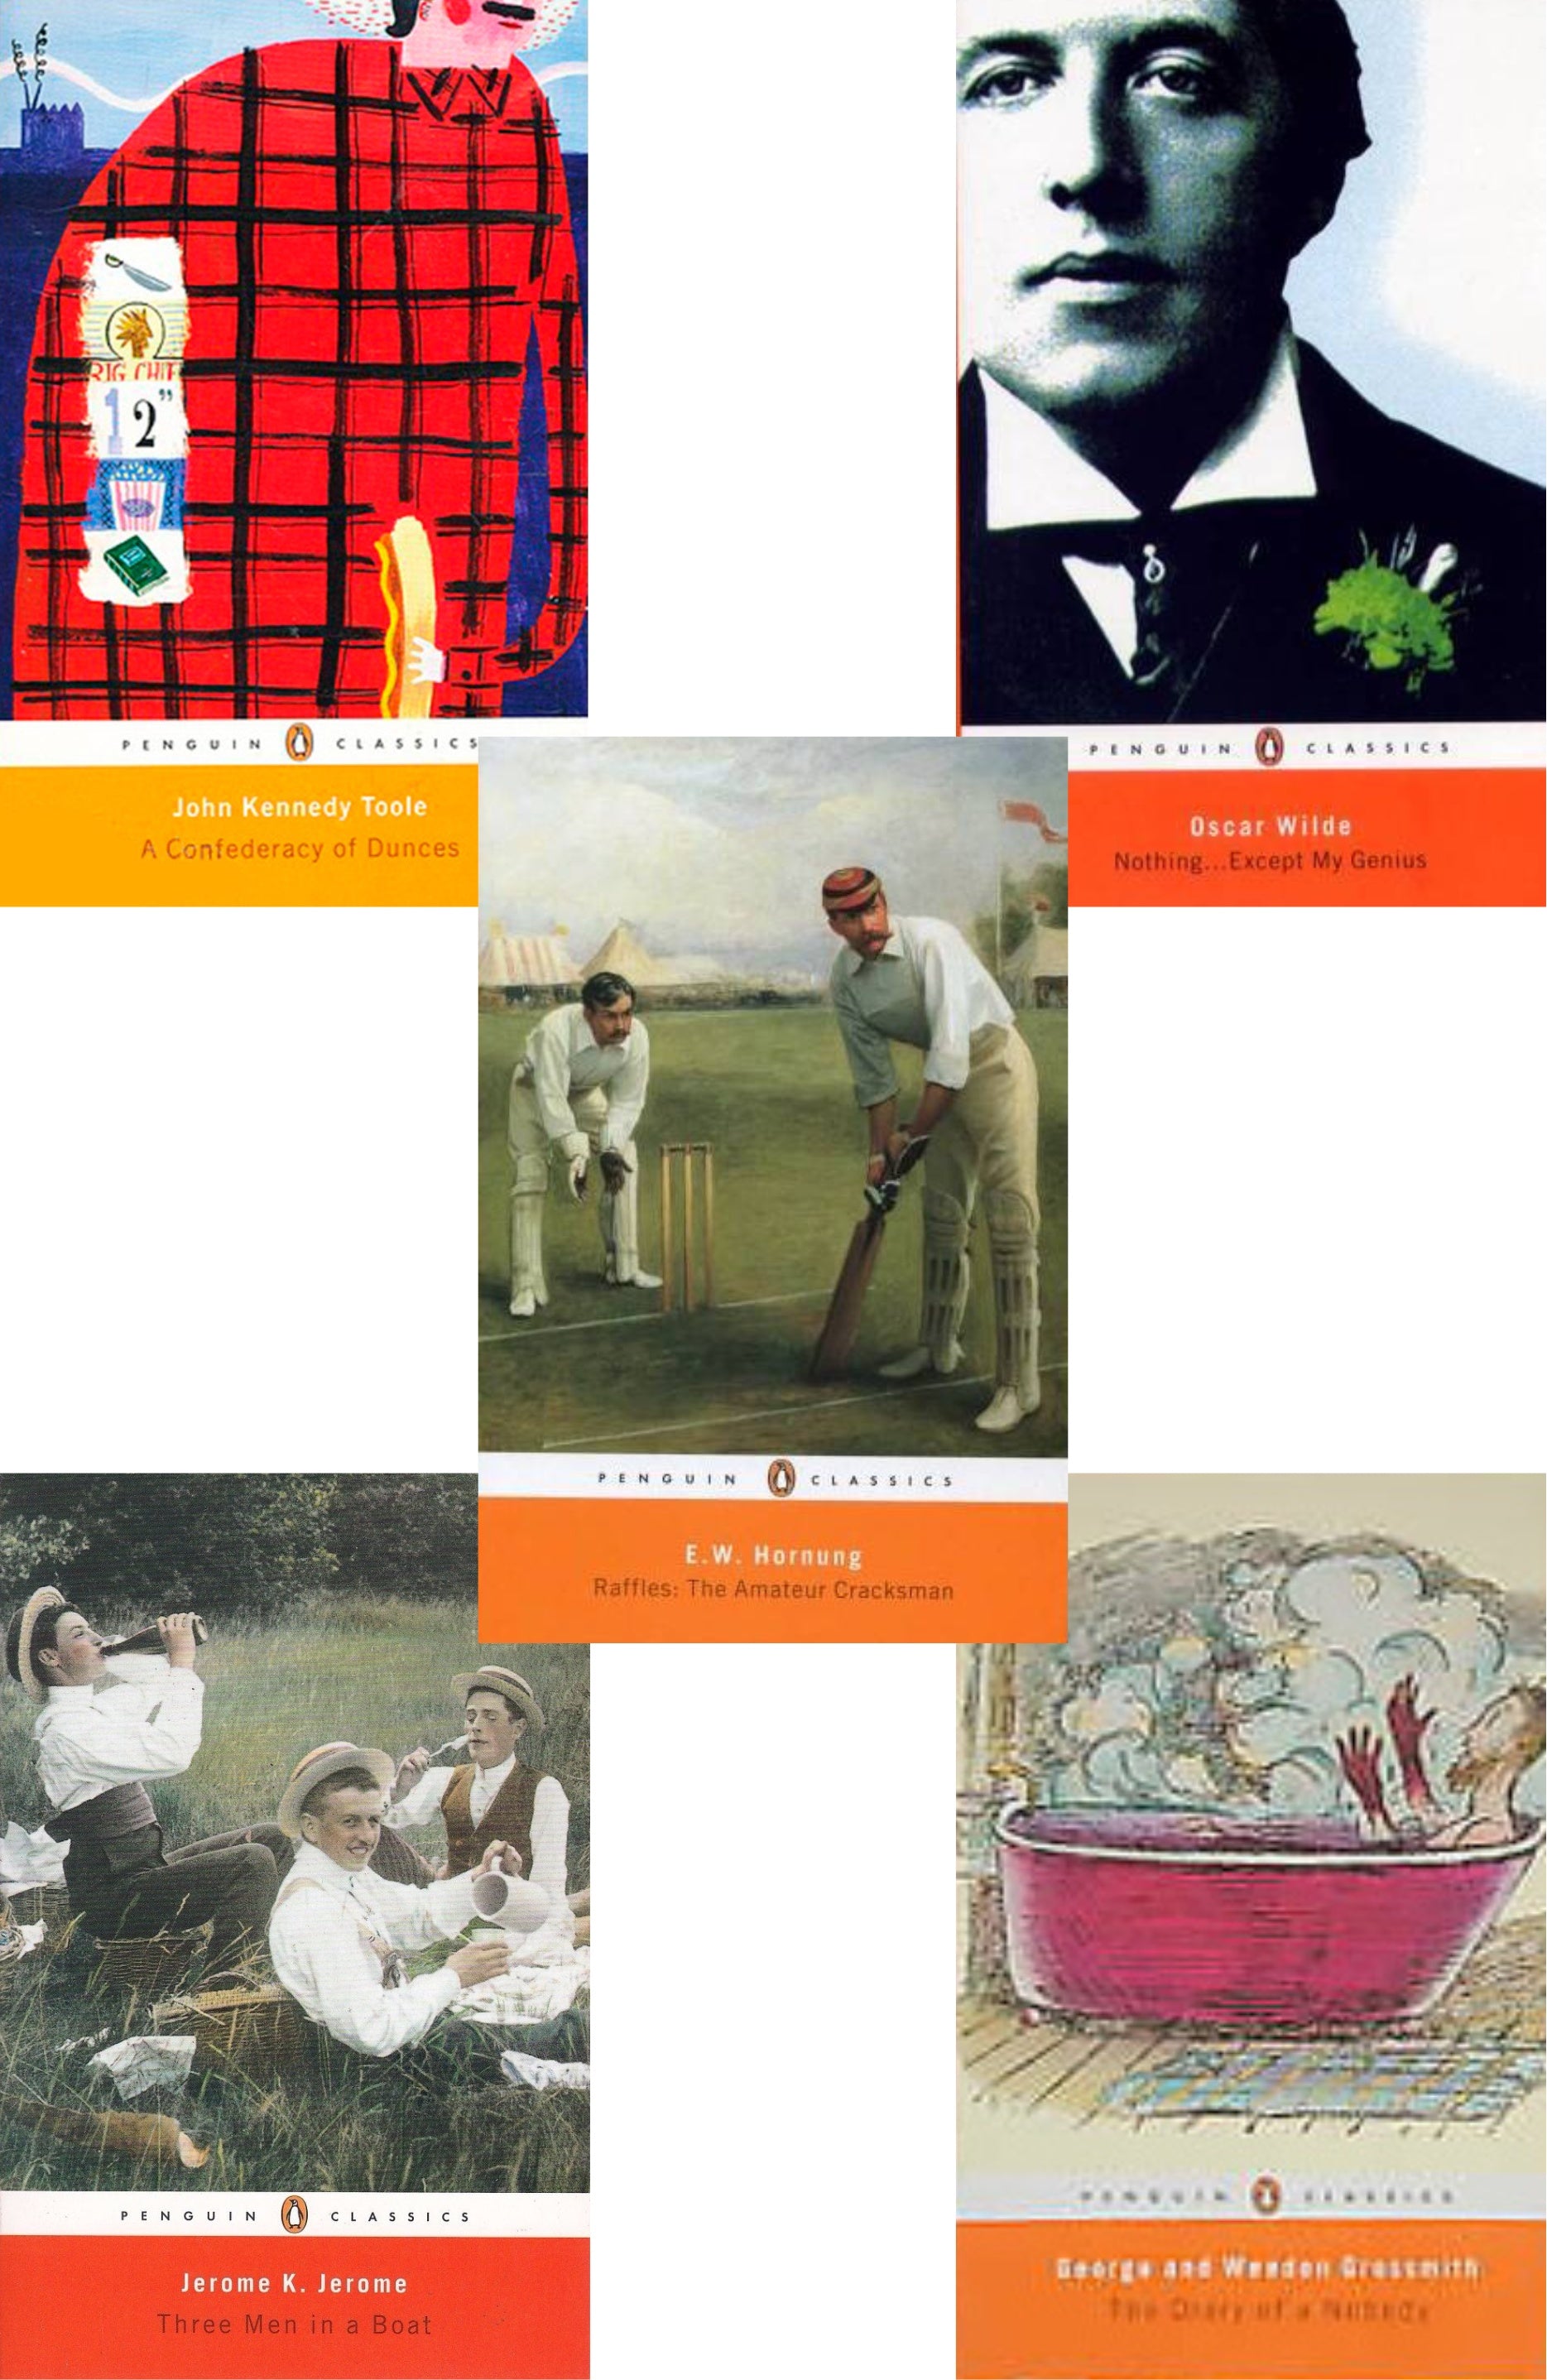 Penguin Classics Bestseller Book Combo ( Nothing Except My Genius, Three Men In a Boat, Raffles: The Amateur Cracksman, Mapp and Licia, The Diary of a Nobody, A Confederacy of Dunces )